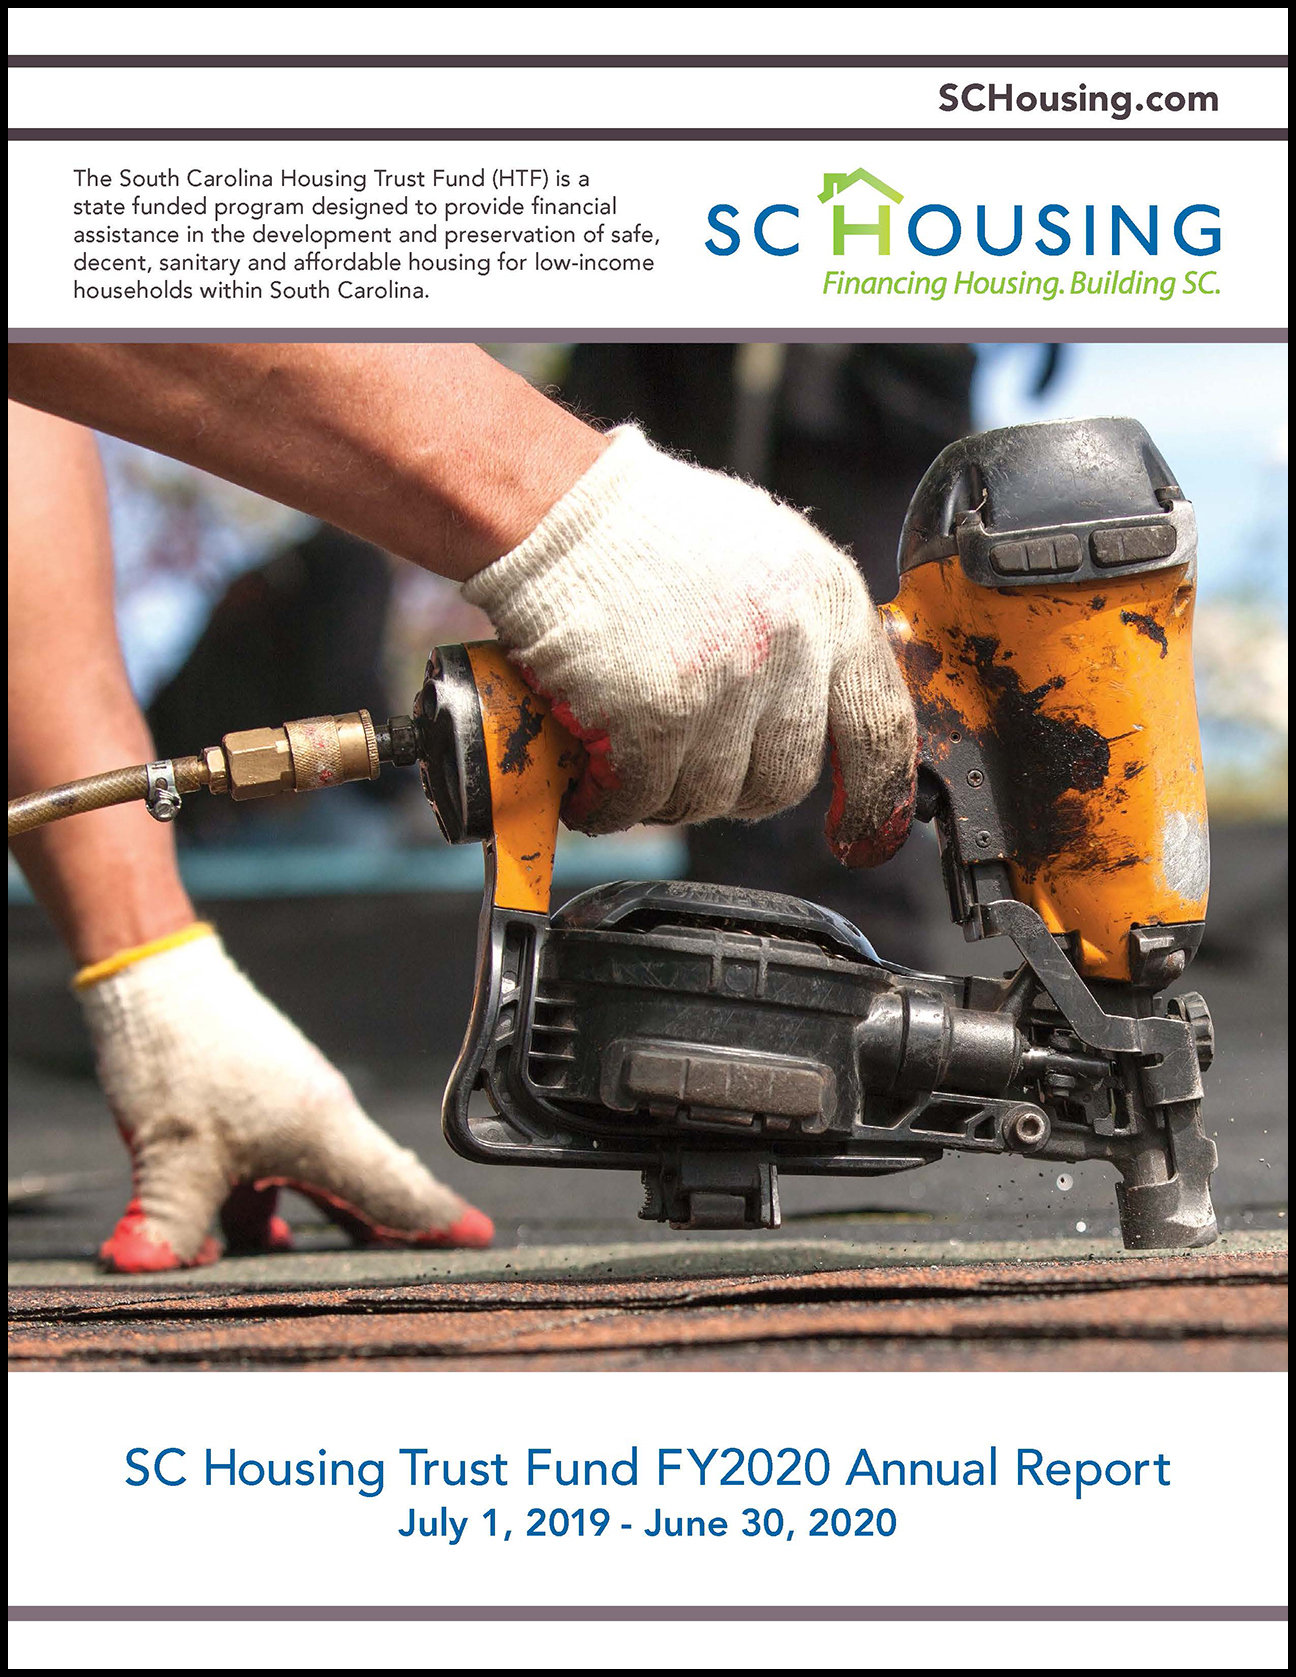 SC HOUSING RELEASES ITS FY2020 HOUSING TRUST FUND REPORT